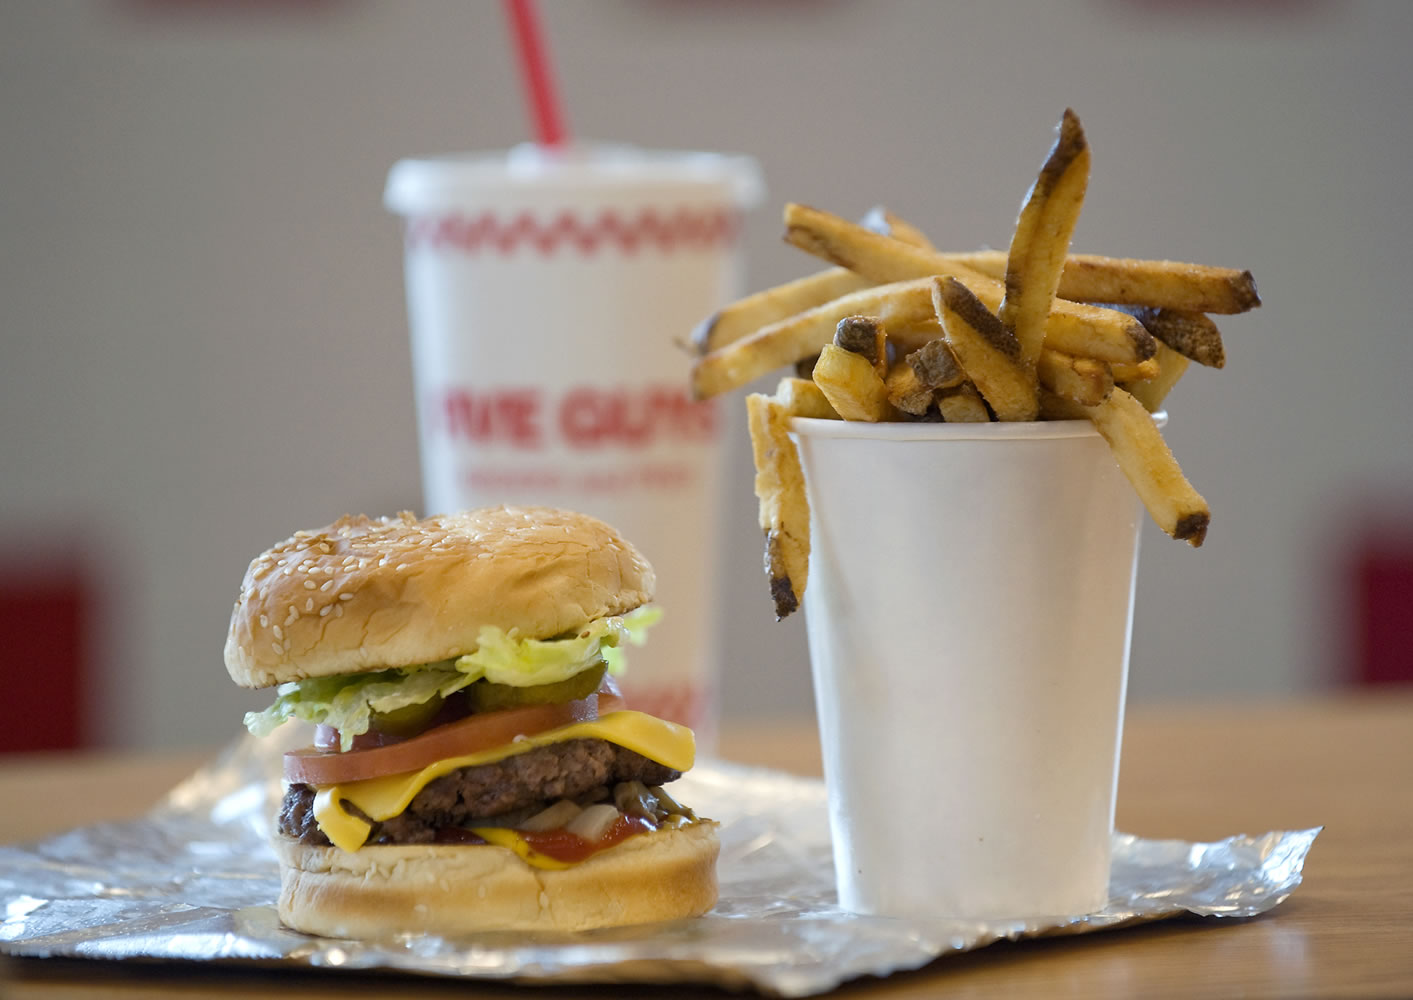 Five Guys Burgers and Fries' Little Cheeseburger and Fries.